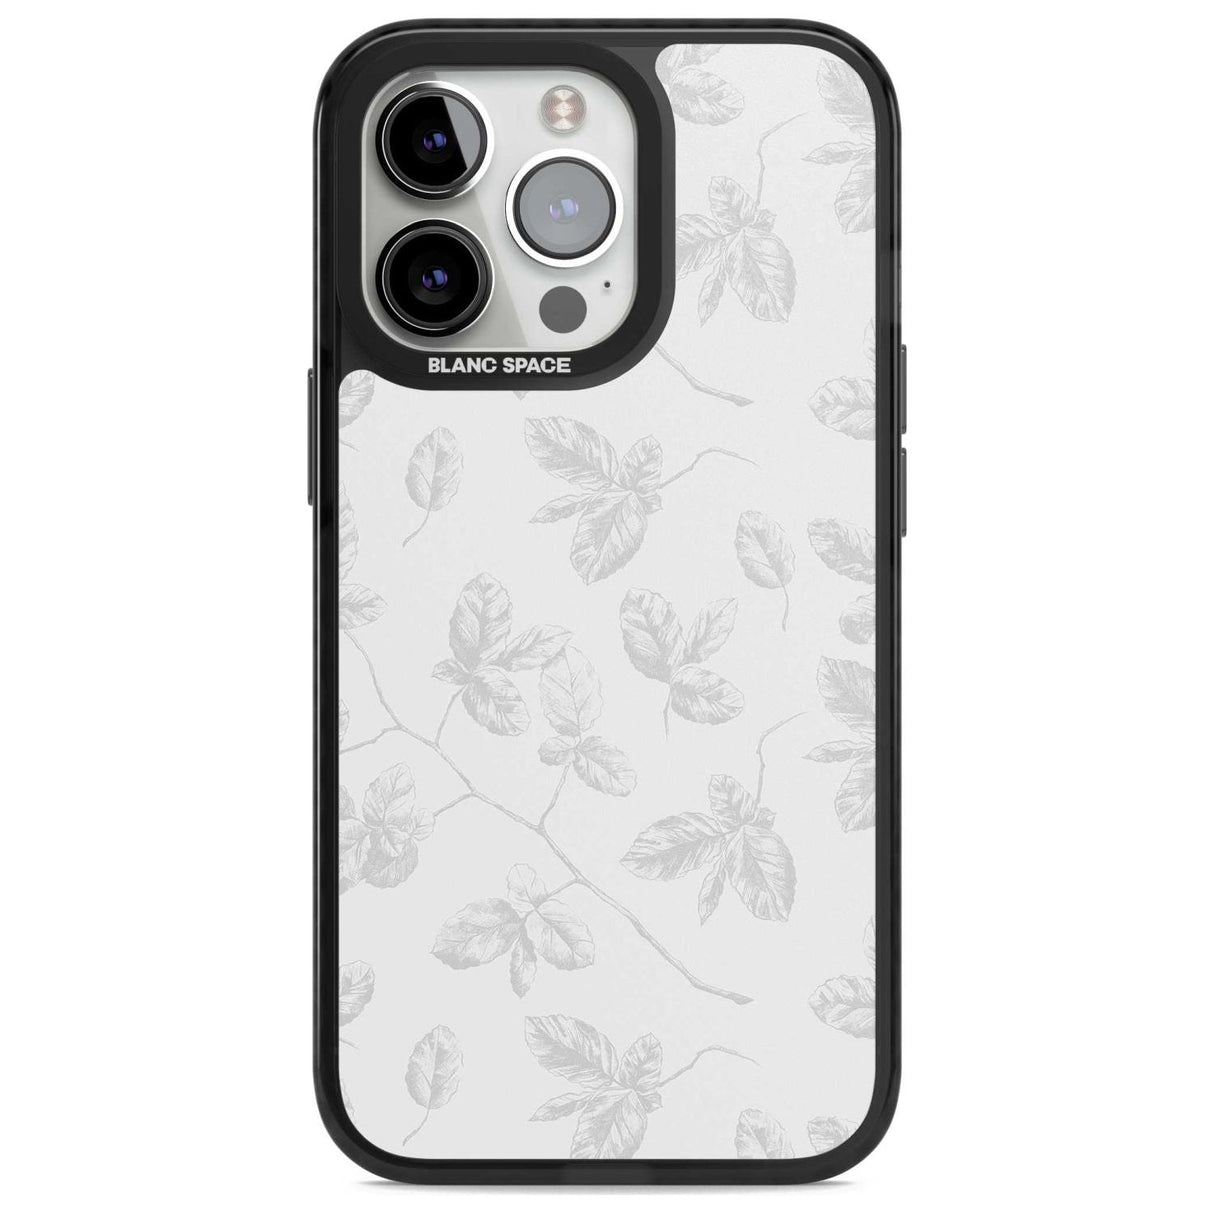 Grey Branches Vintage Botanical Phone Case iPhone 15 Pro Max / Magsafe Black Impact Case,iPhone 15 Pro / Magsafe Black Impact Case,iPhone 14 Pro Max / Magsafe Black Impact Case,iPhone 14 Pro / Magsafe Black Impact Case,iPhone 13 Pro / Magsafe Black Impact Case Blanc Space